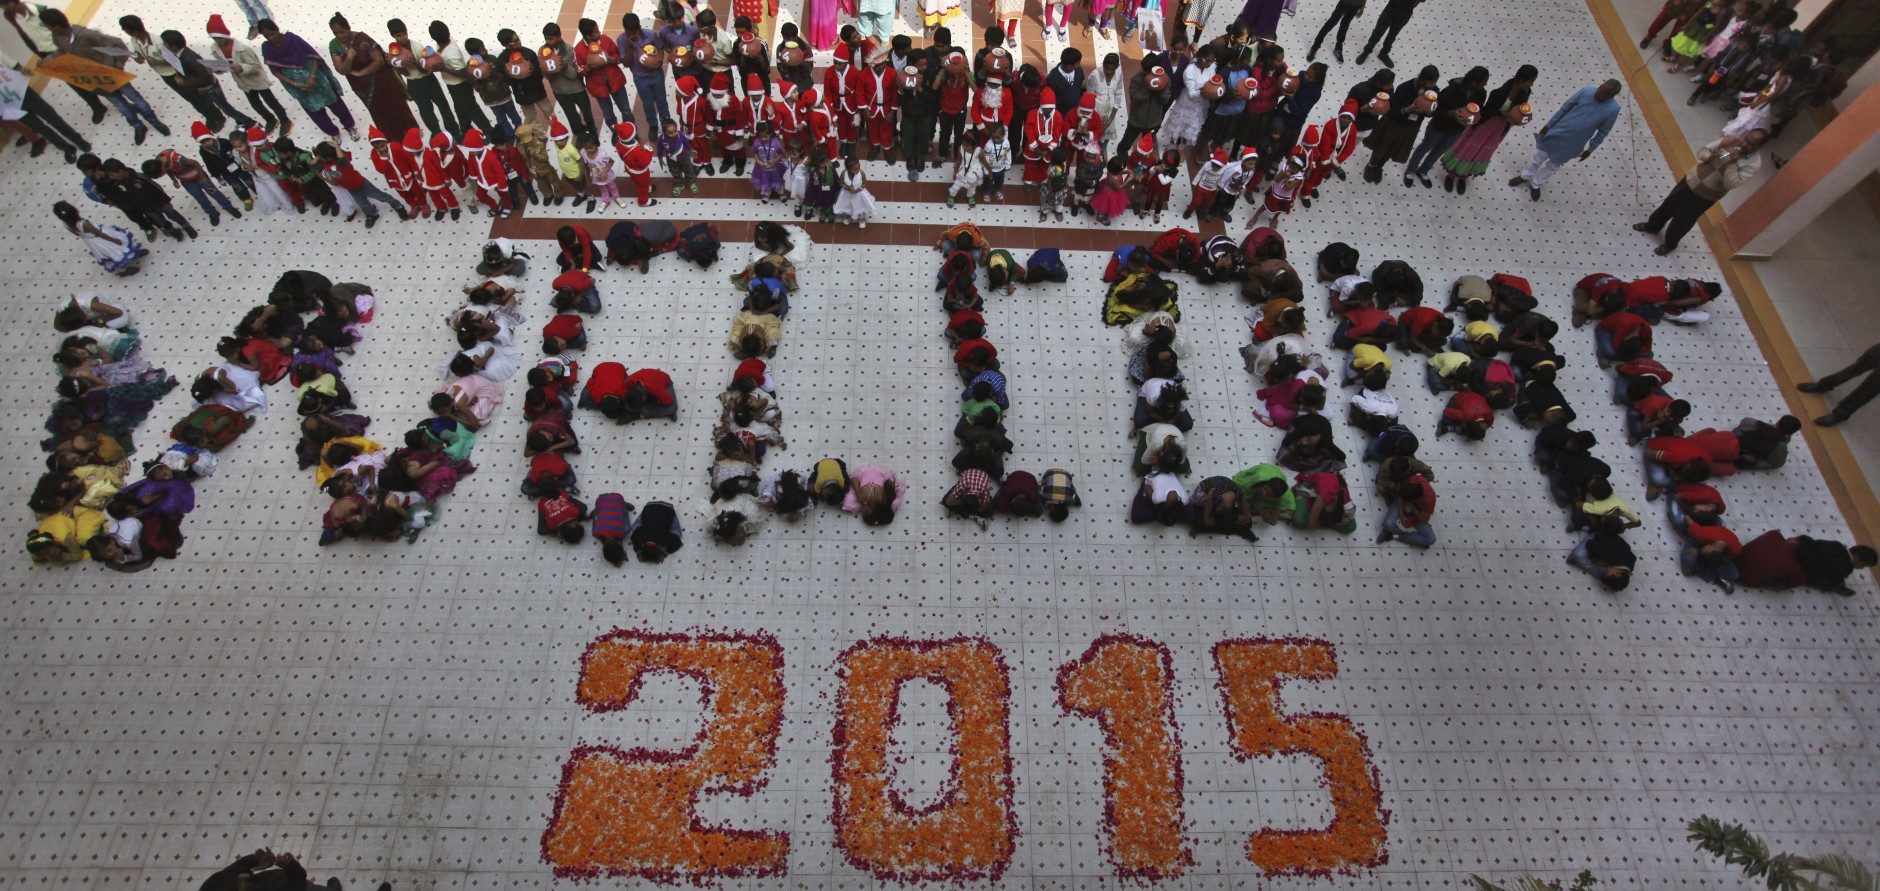 Indian students form numbers representing the year 2015 during a function to welcome the New Year at a school in Ahmadabad, India, Wednesday, Dec. 31, 2014. (AP Photo/Ajit Solanki)